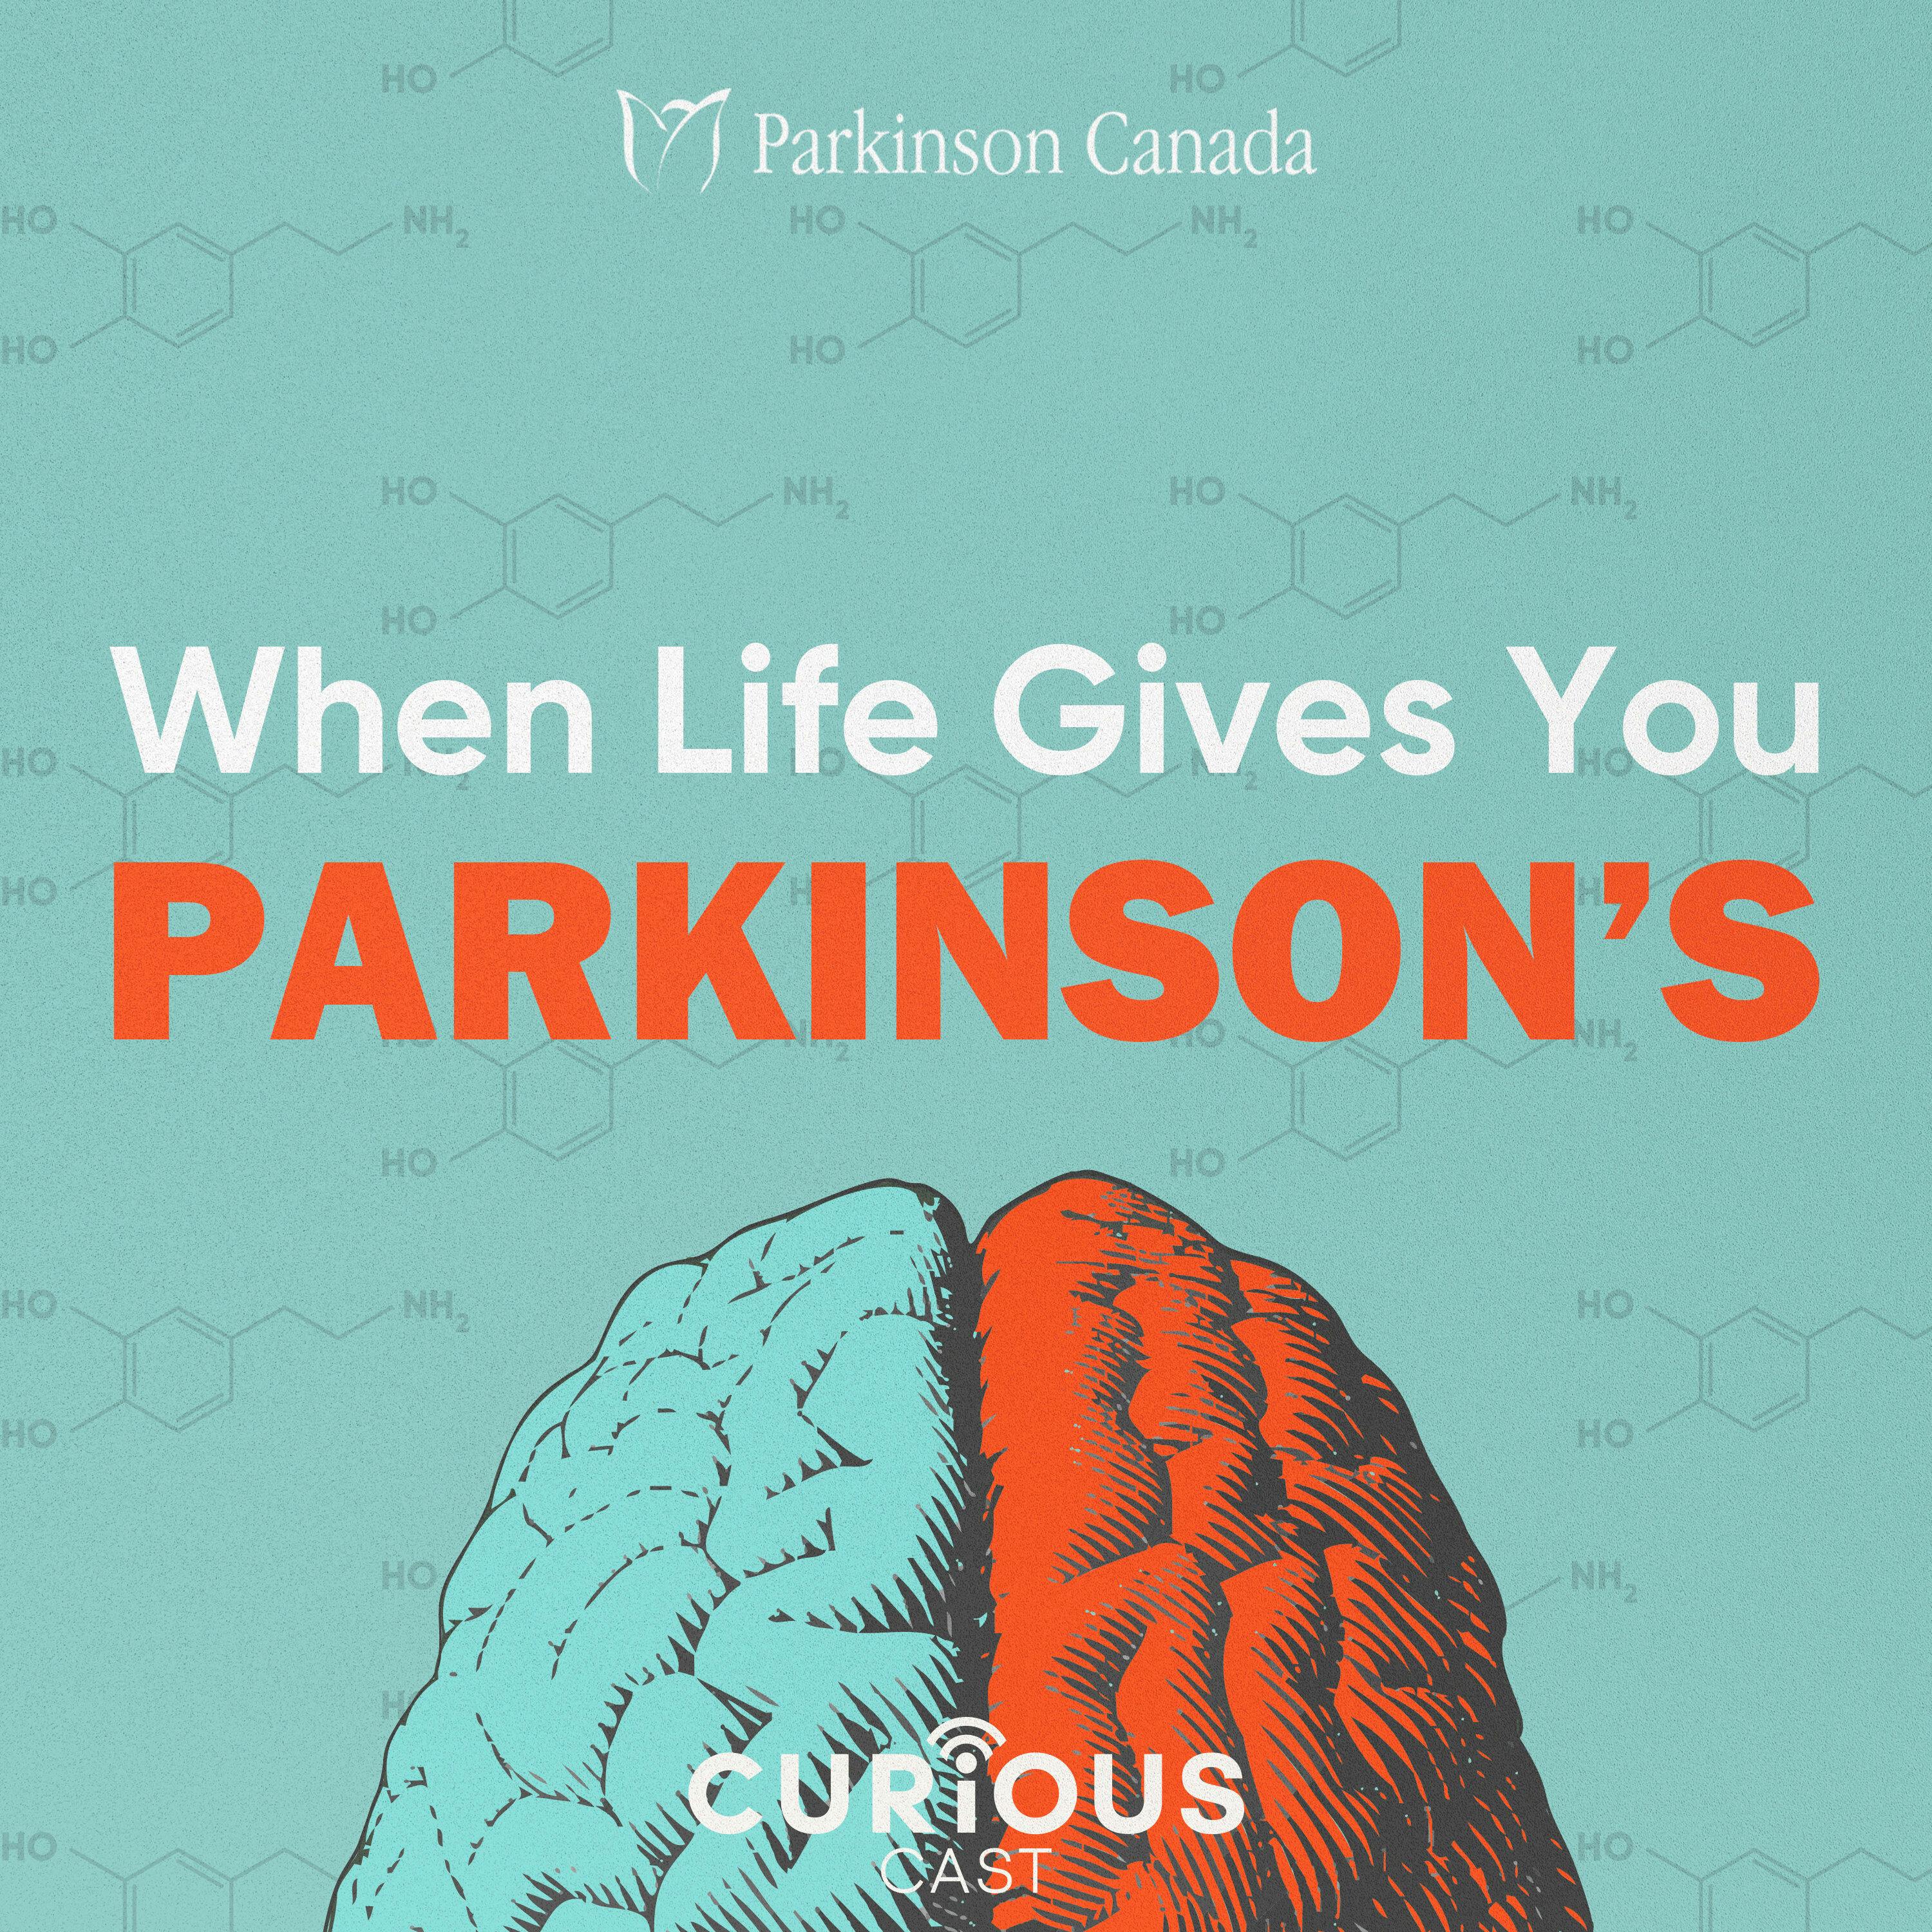 Advocacy, collaboration and Parkinson’s in 2021 – featuring Dr. Karen Lee and Eli Pollard